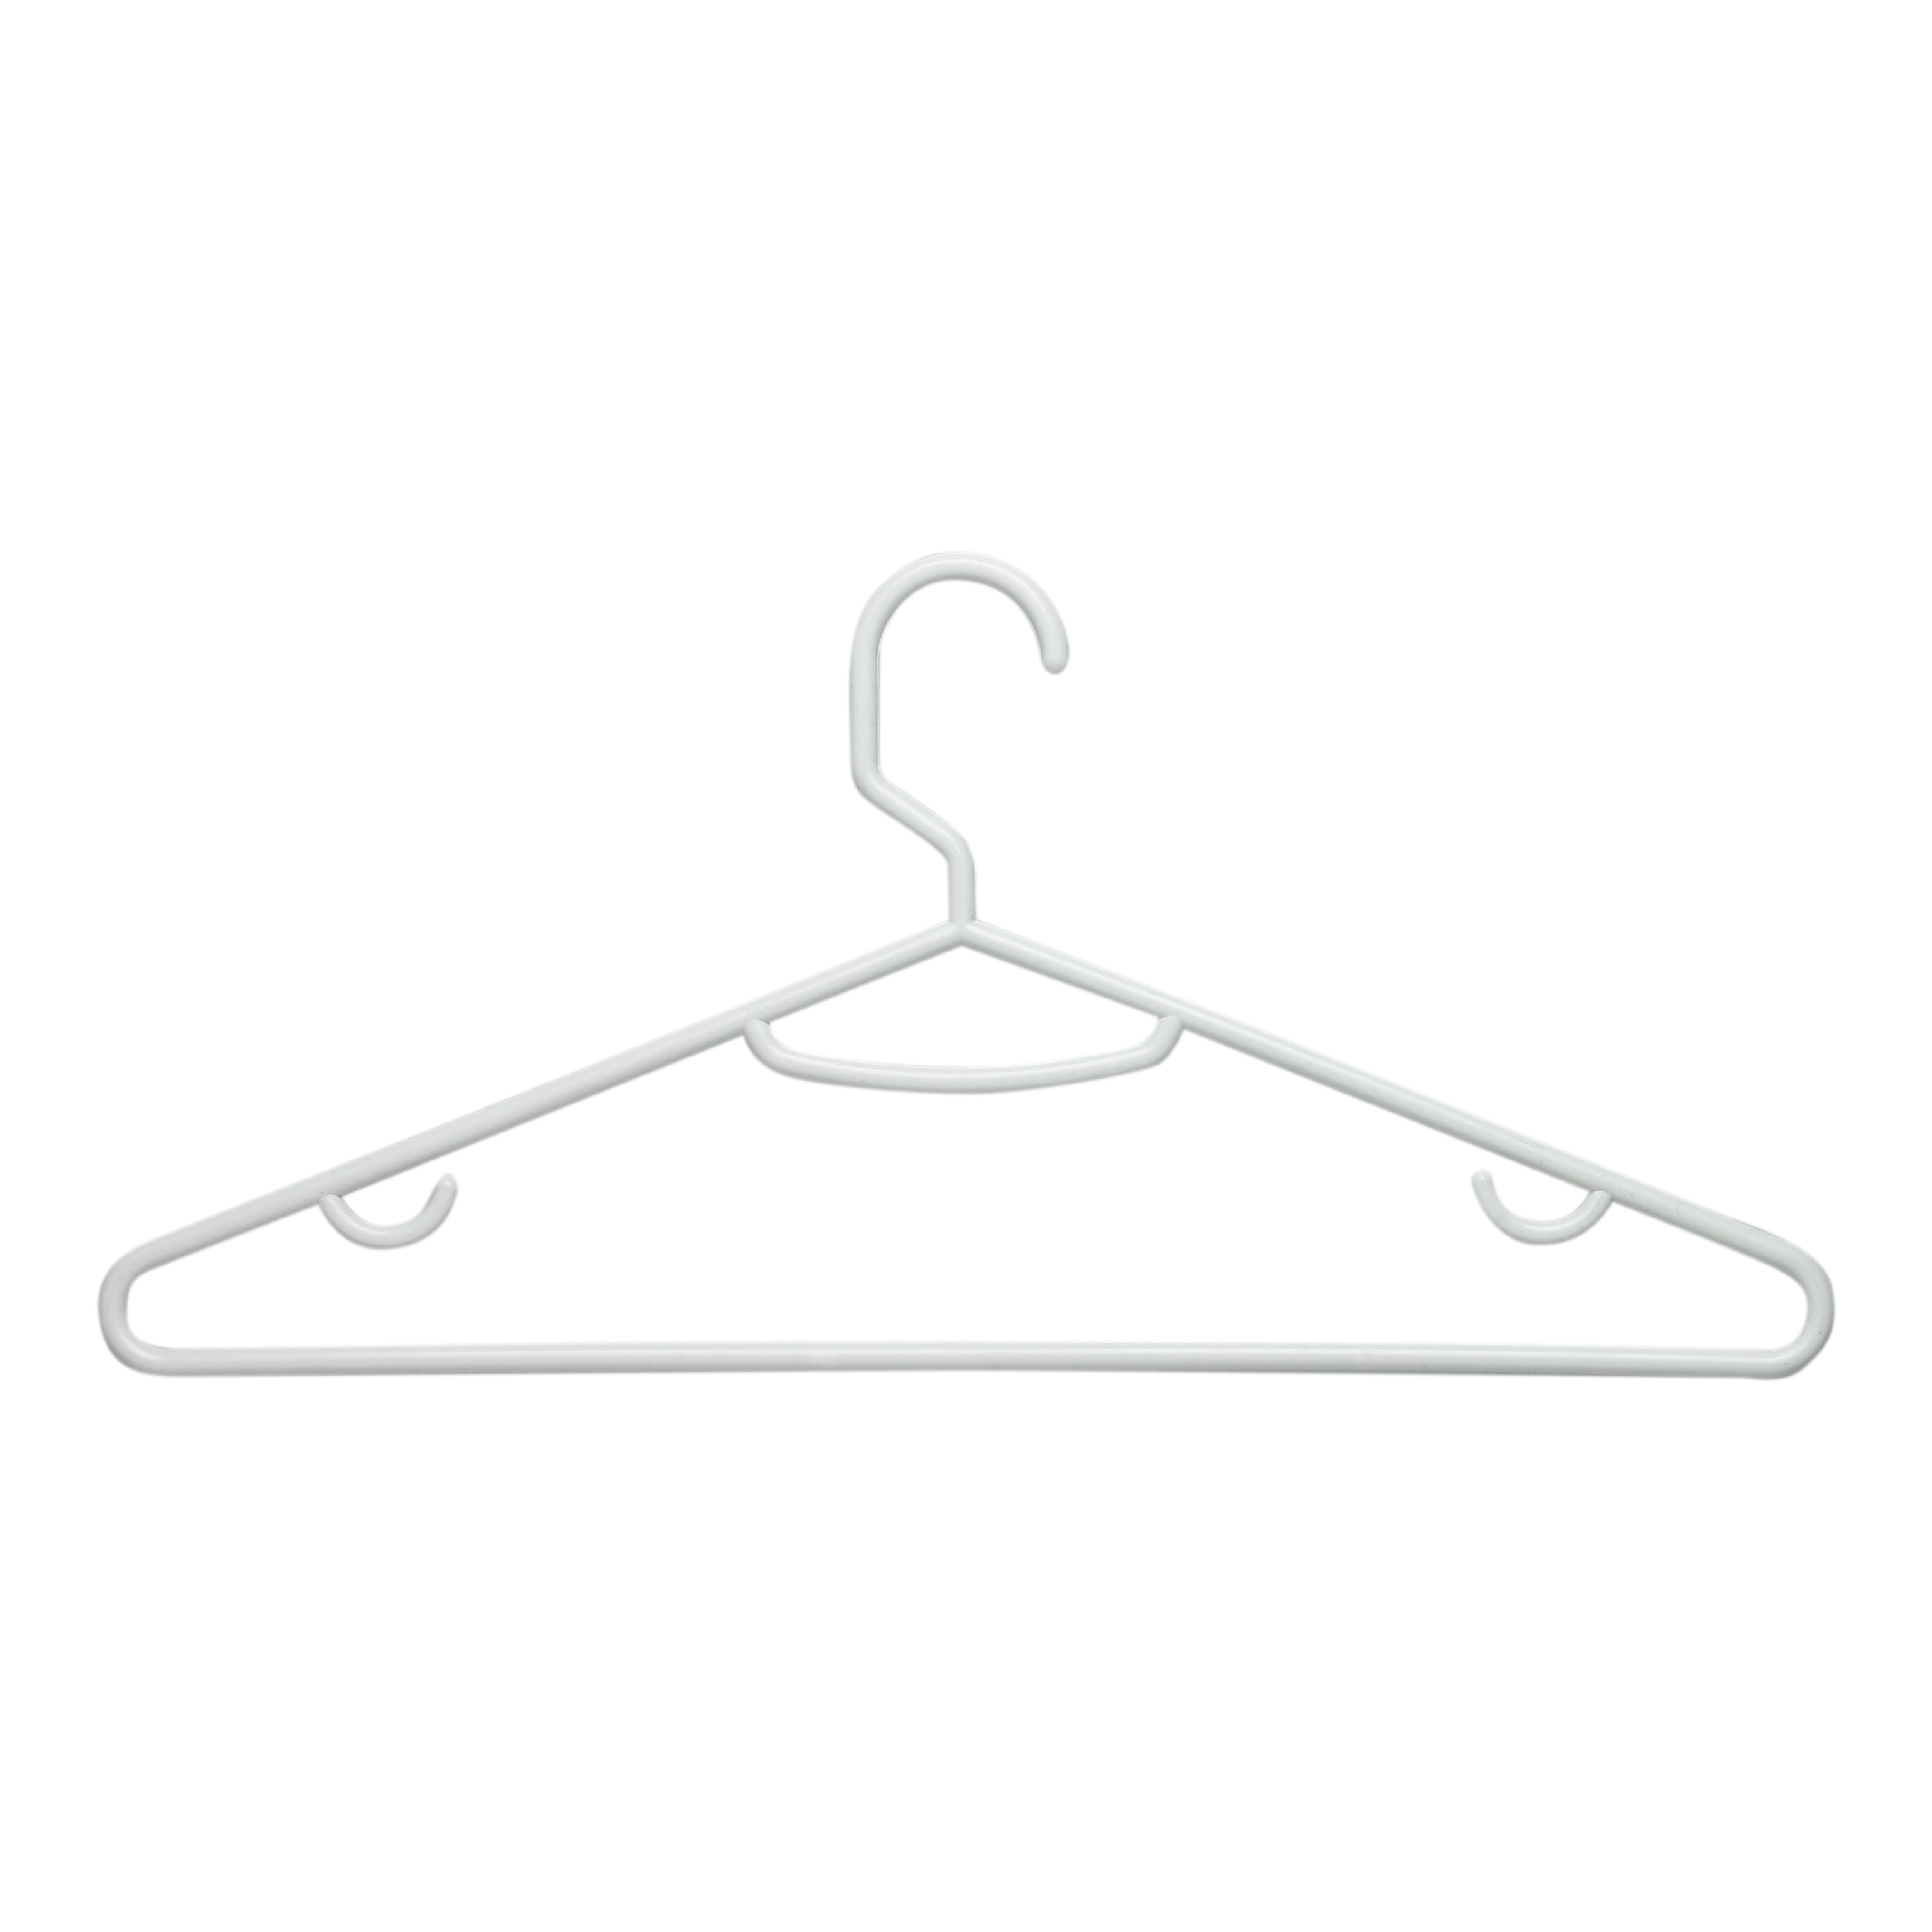 Honey-Can-Do 50-Pack Plastic Non-slip Grip Clothing Hanger (Grey) in the  Hangers department at